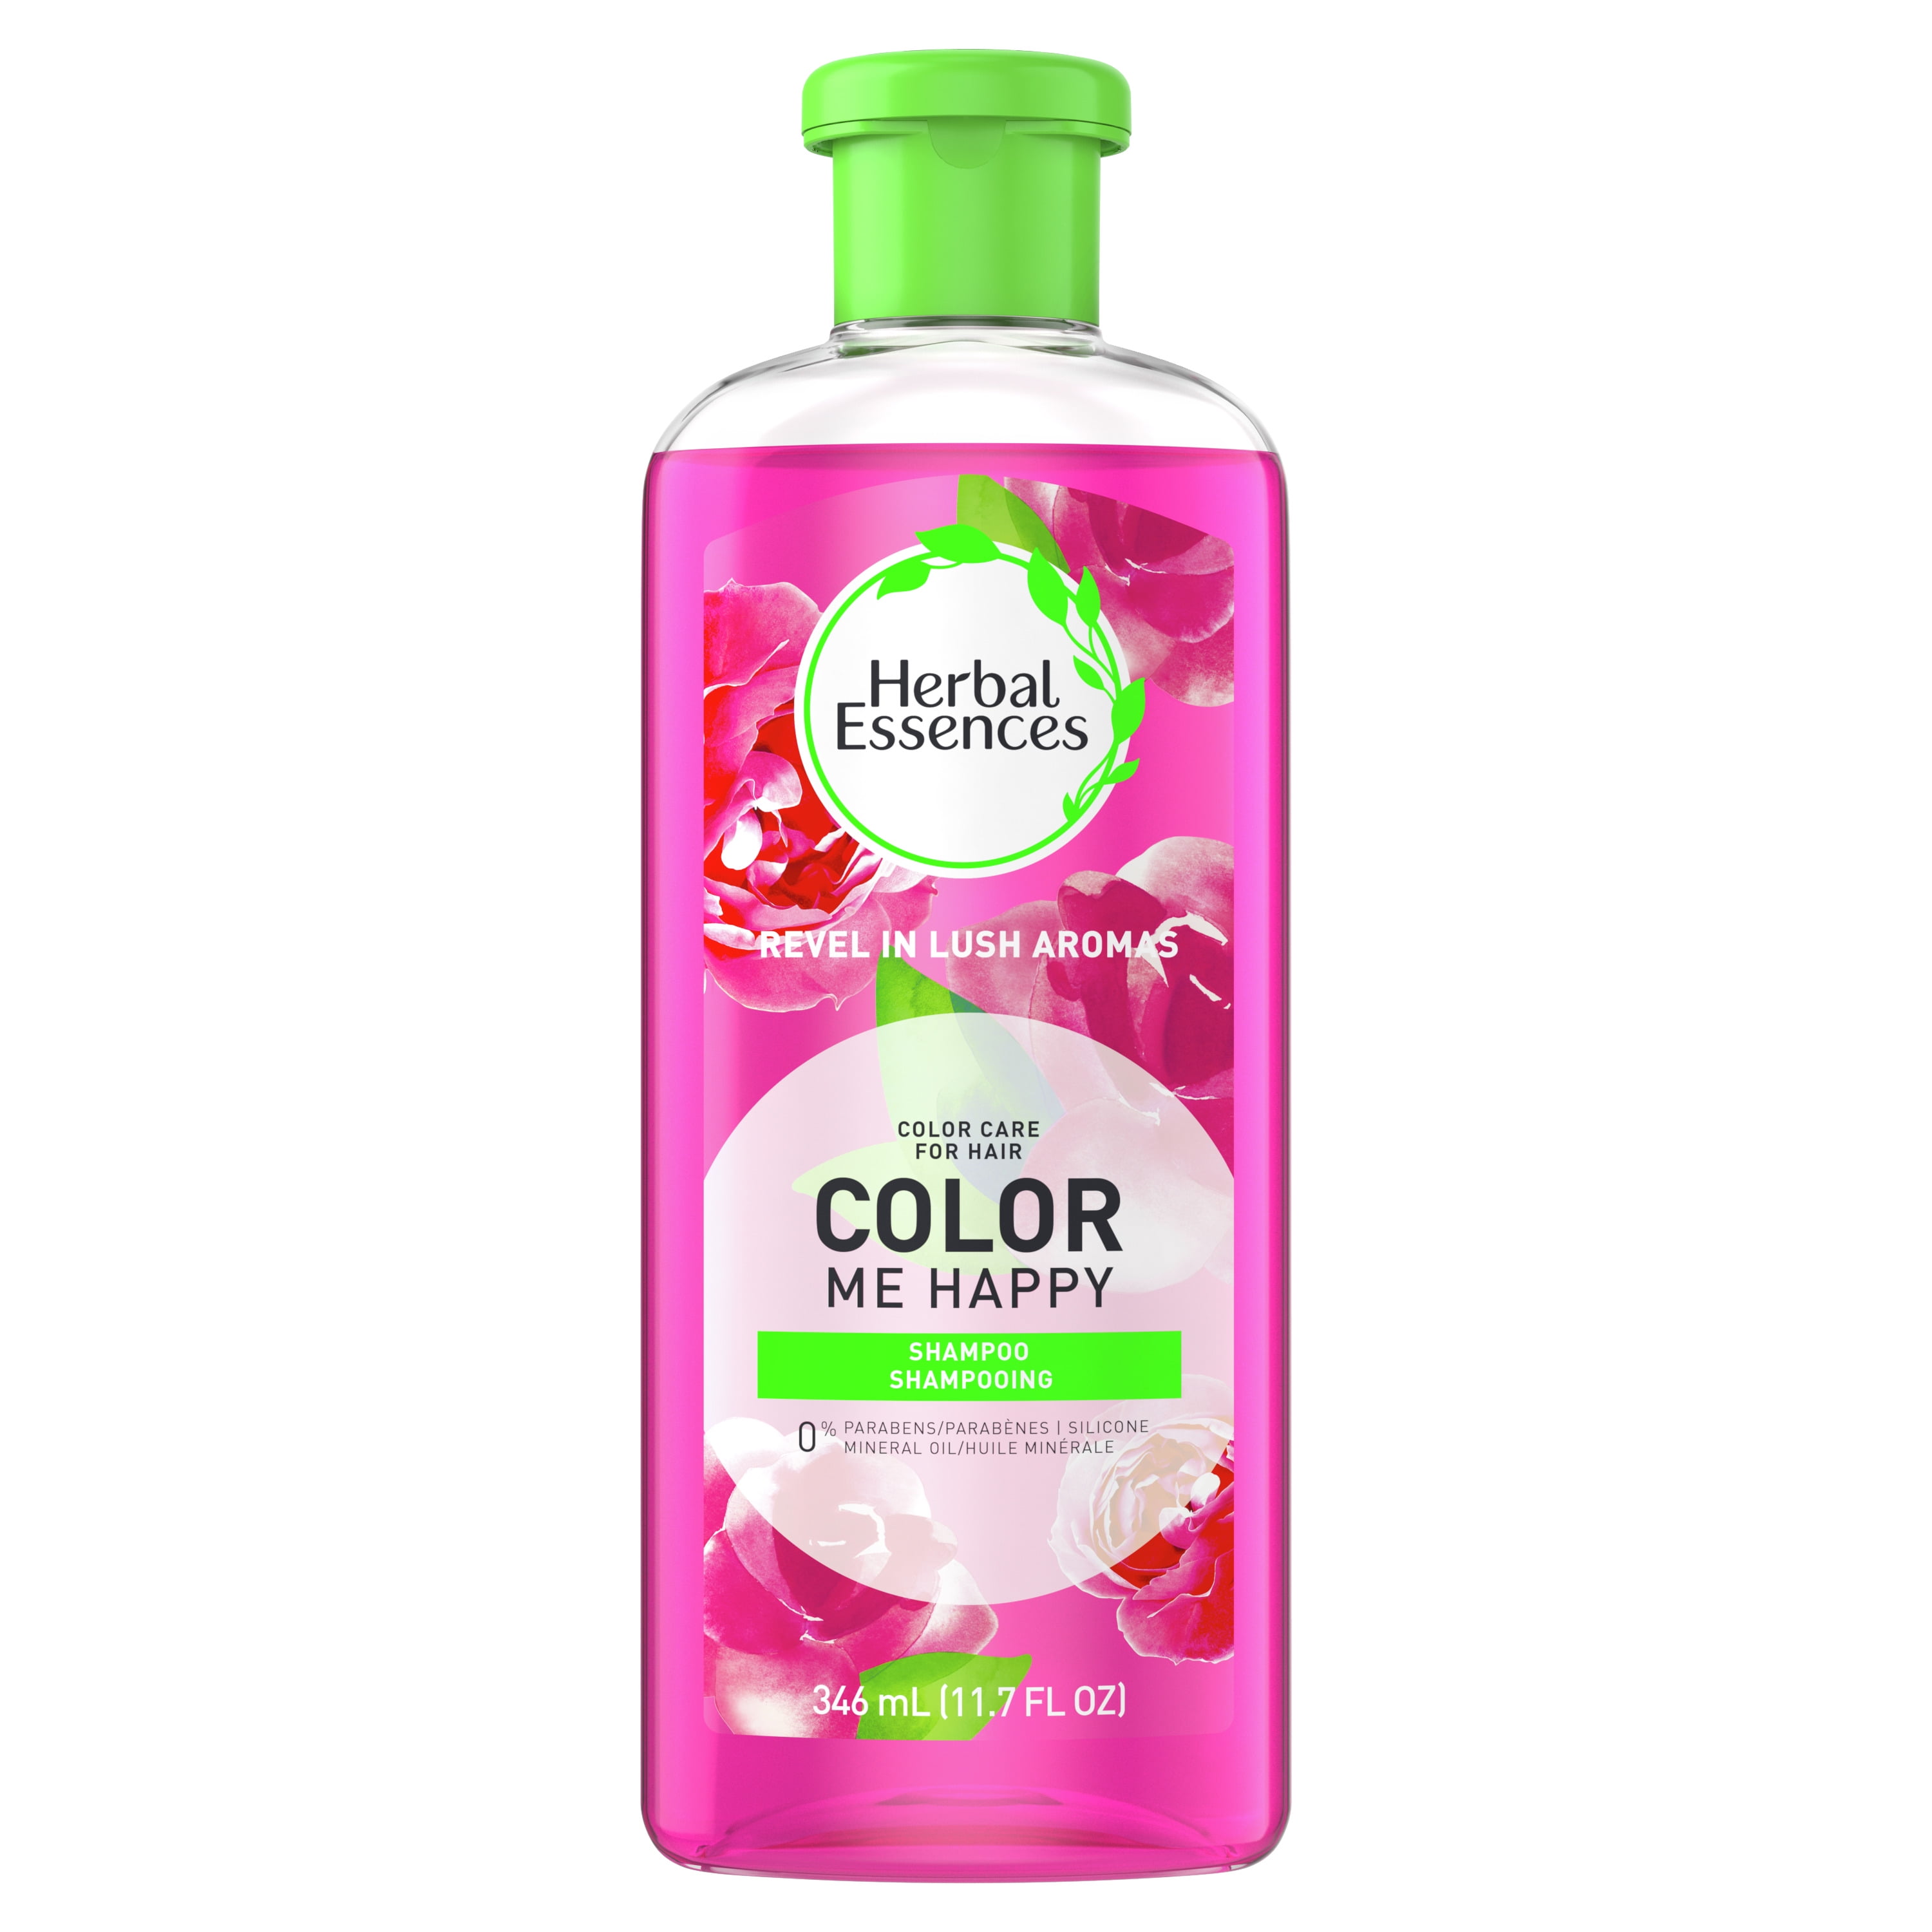 Shampoo that colors your hair